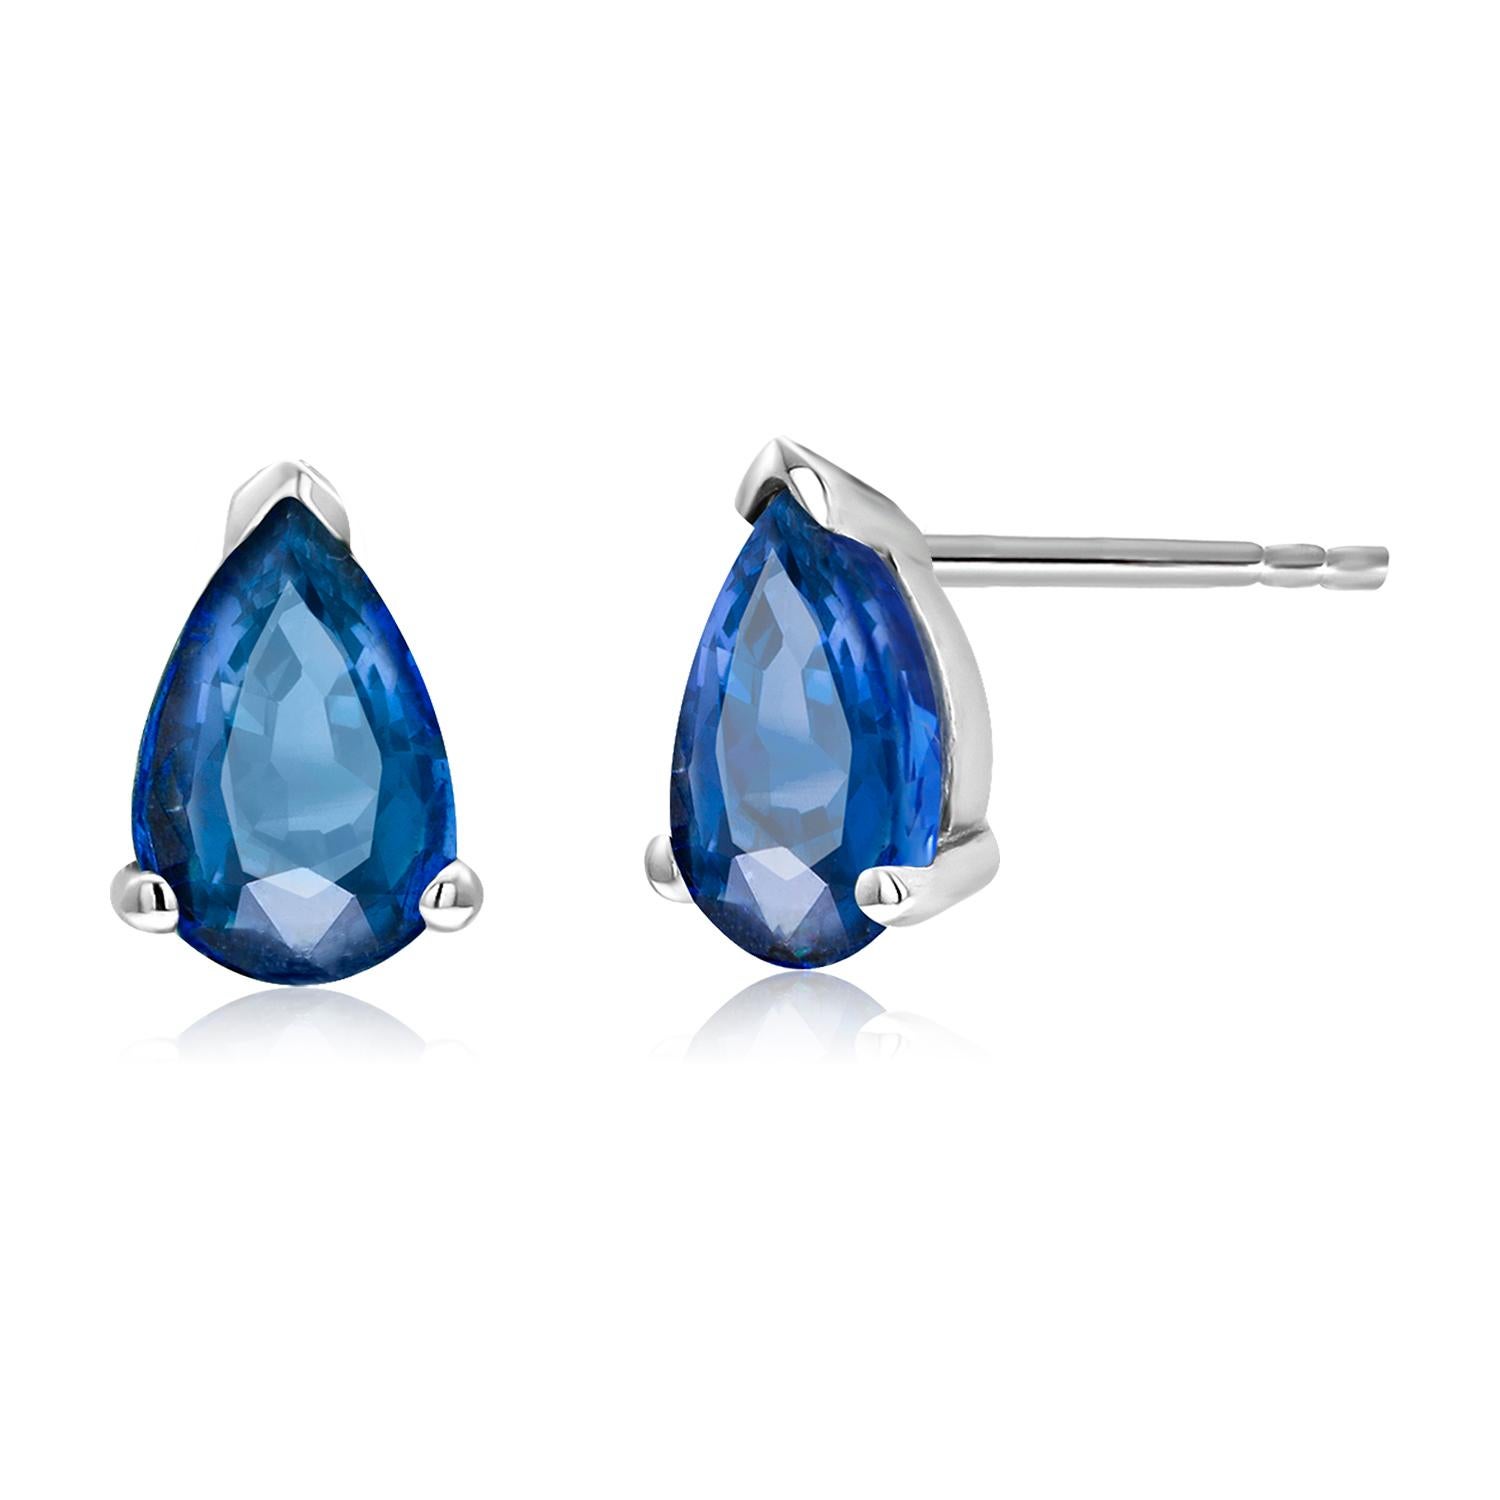 Women's or Men's Pair Blue Pear Shape Sapphire White Gold Stud Earrings Weighing 1.45 Carats